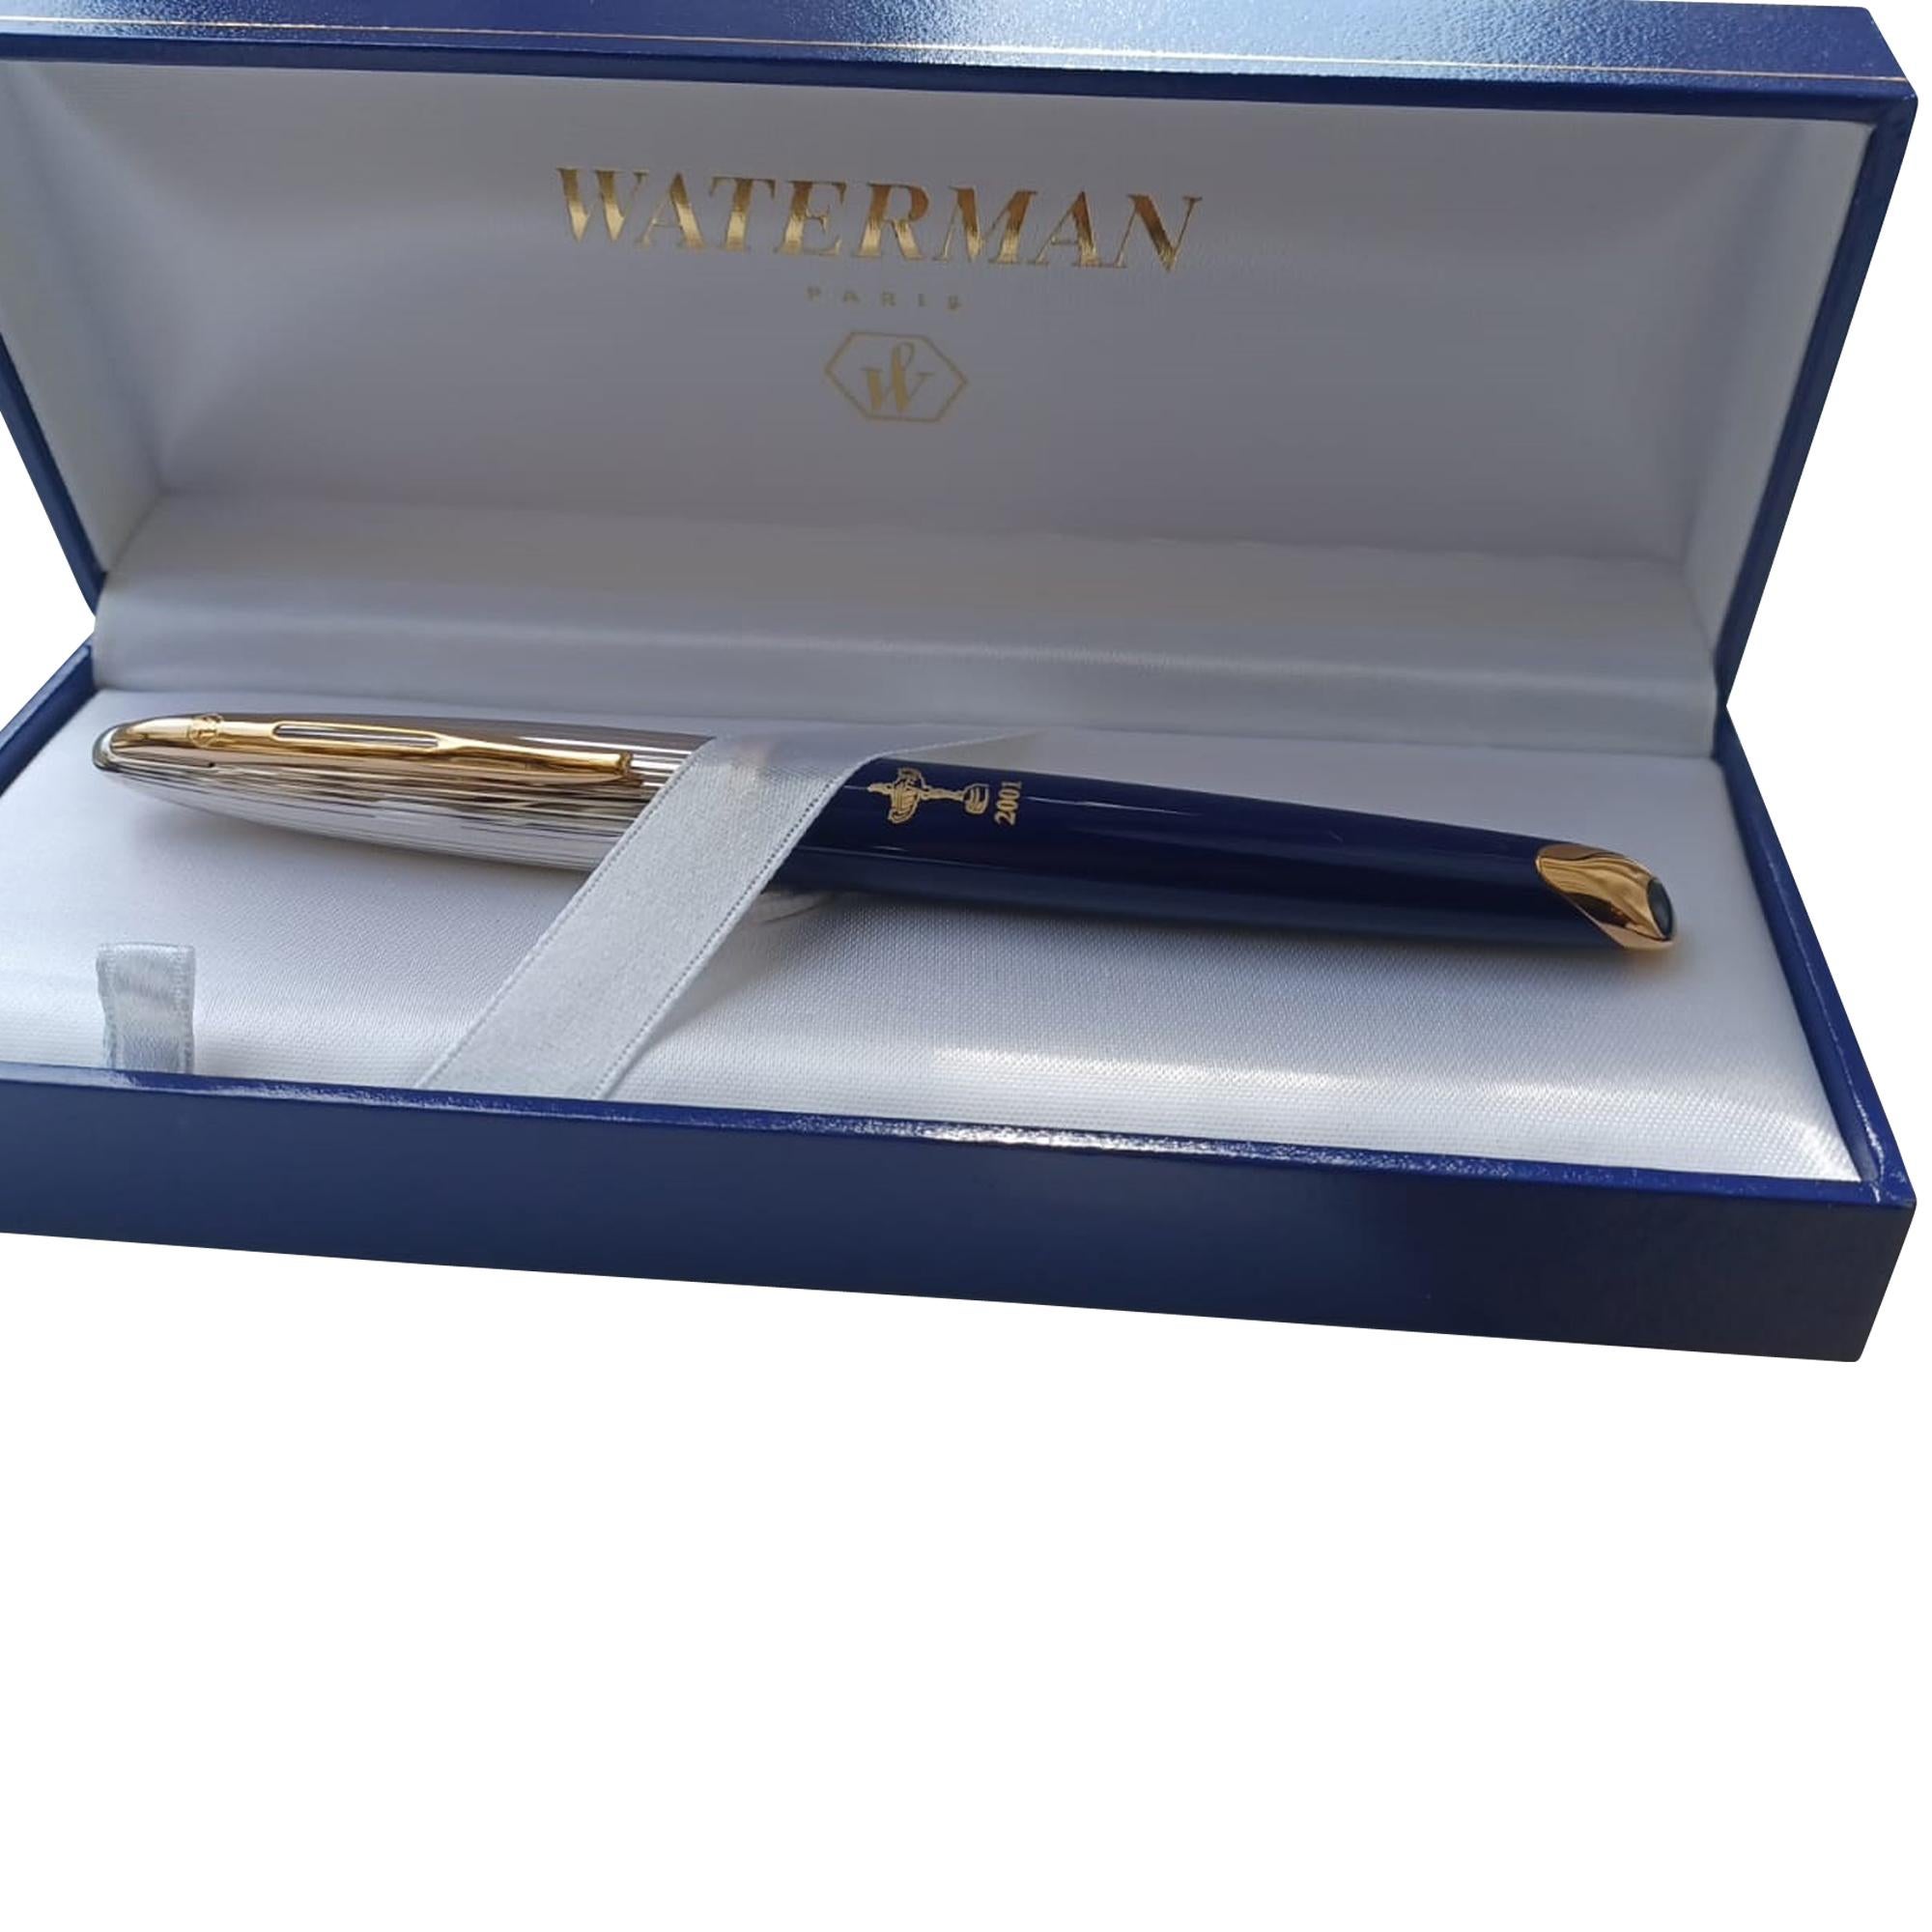 Rare 2001 Postponed Ryder Cup Waterman Ink Fountain Pen with 18K Gold Nib For Sale 10